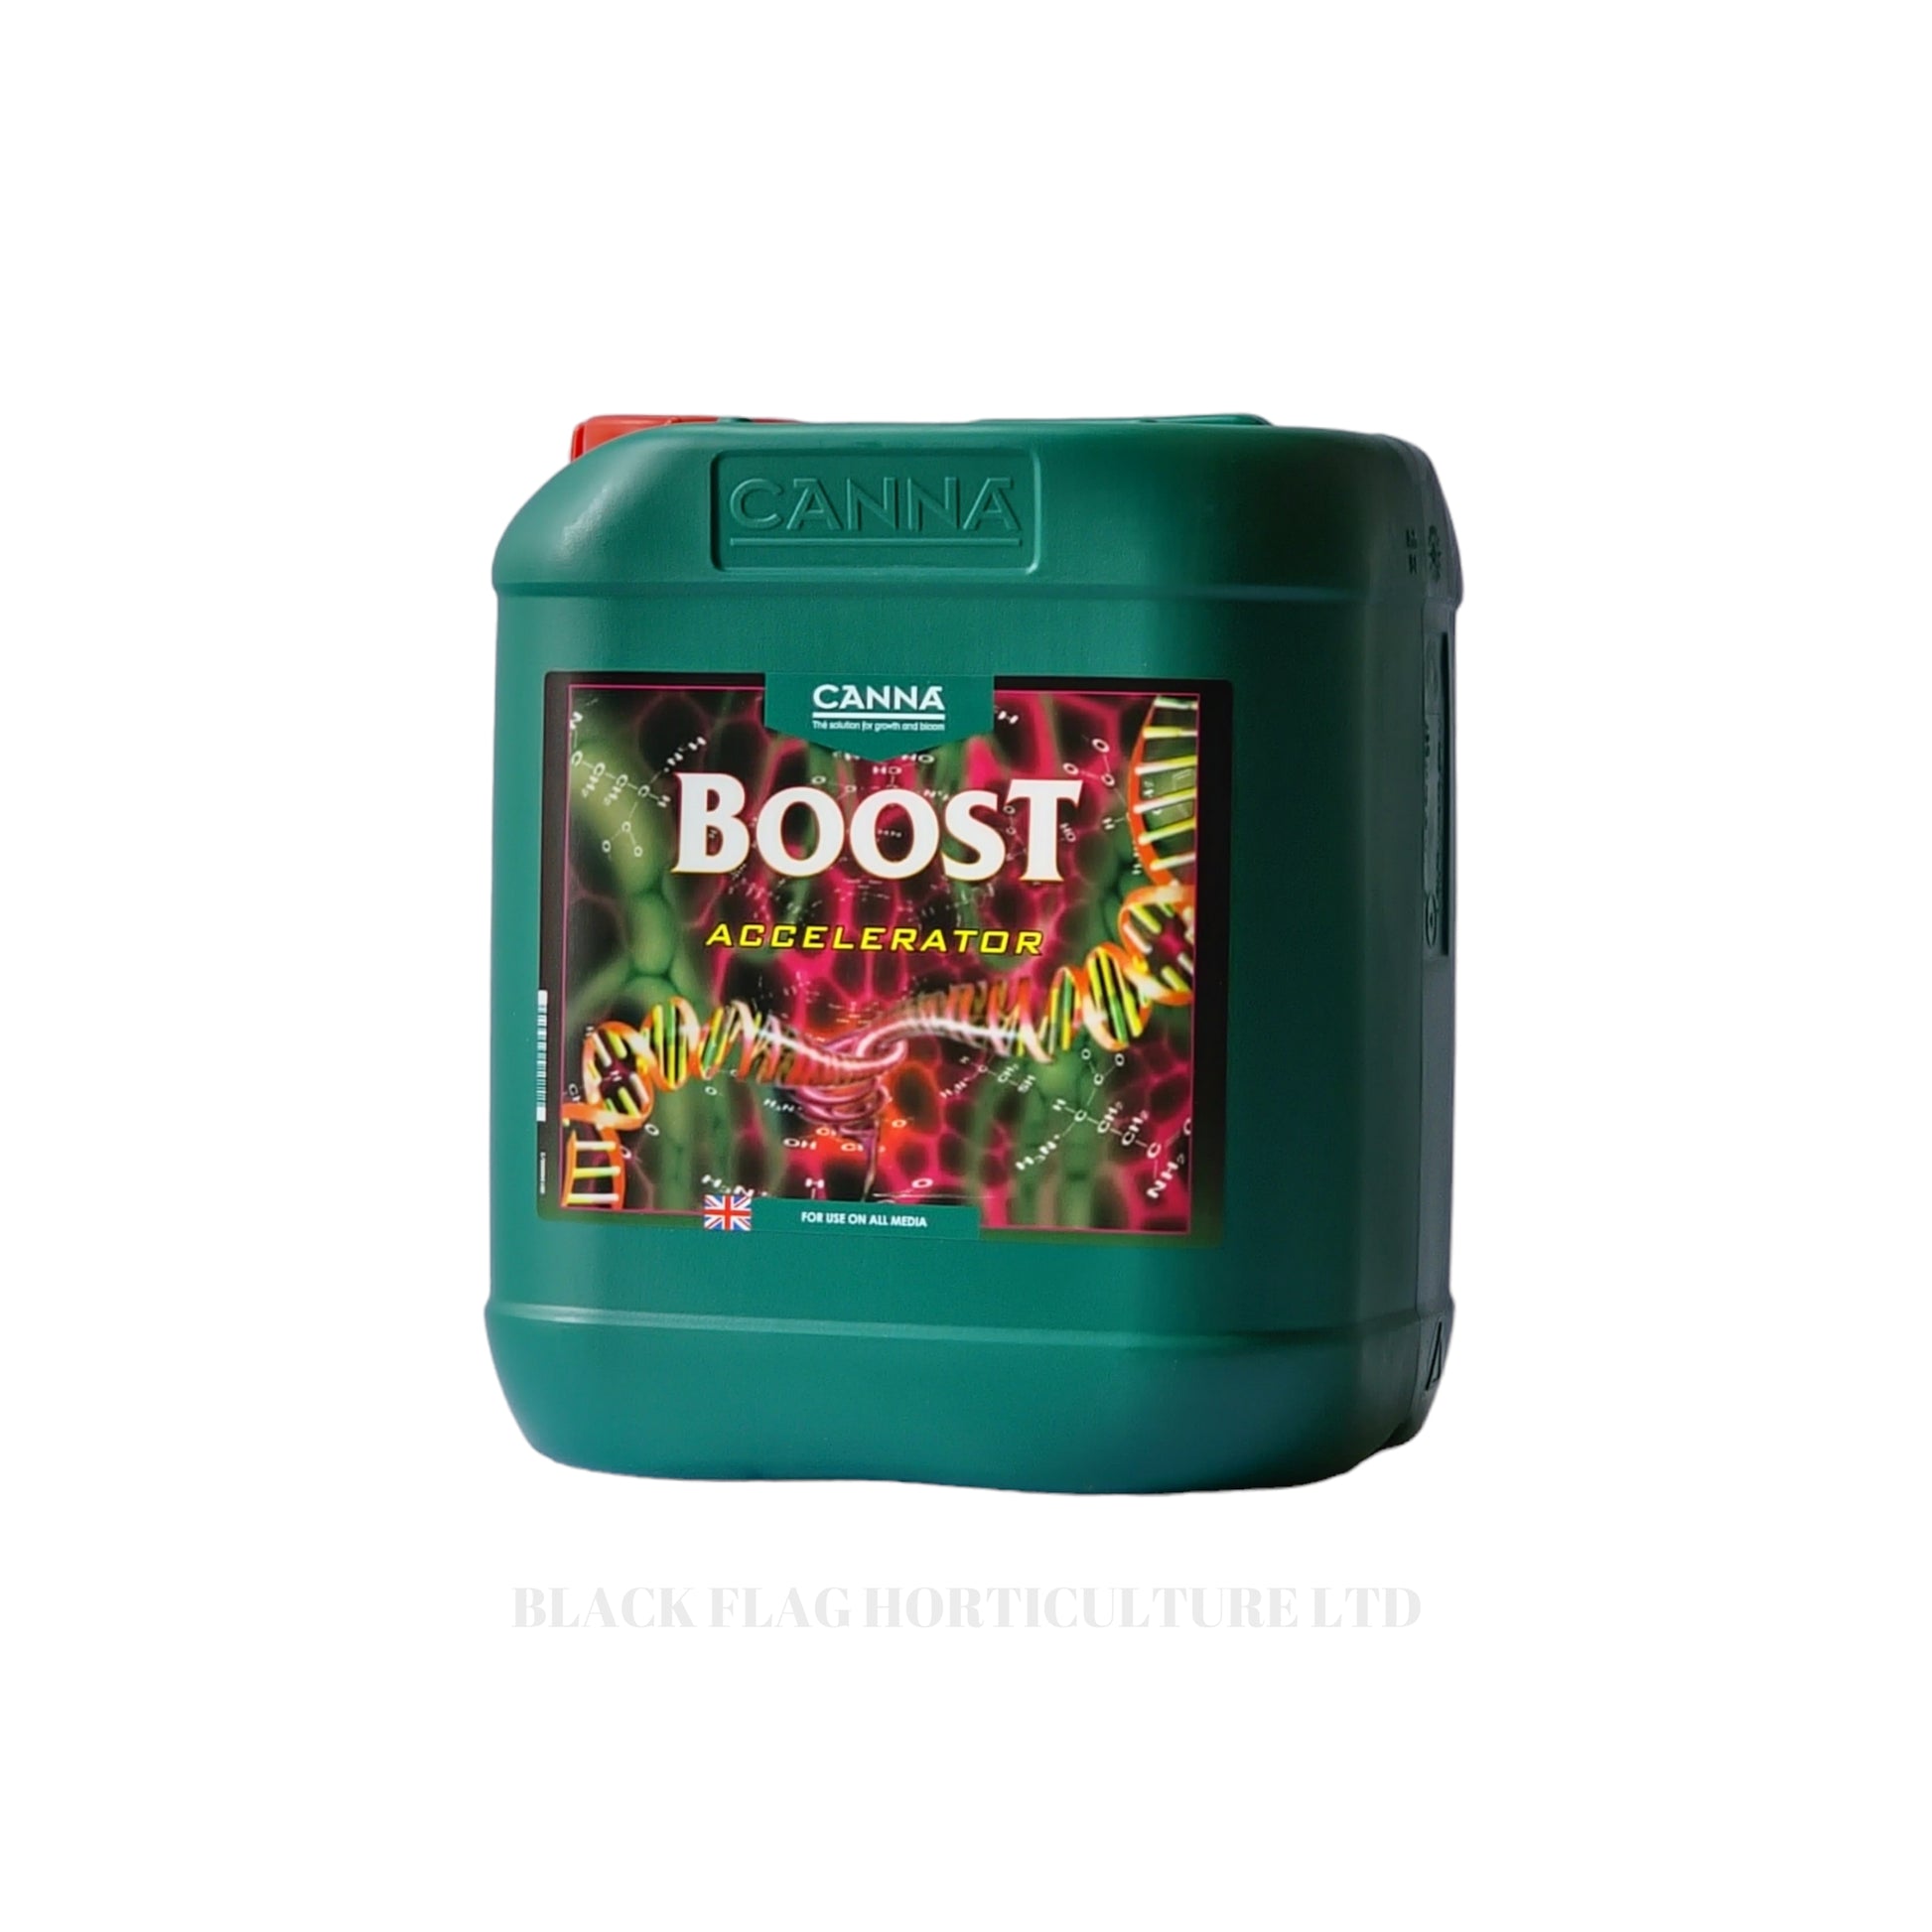 Canna - Boost Accelerator - Flowering Booster - 5 Litres